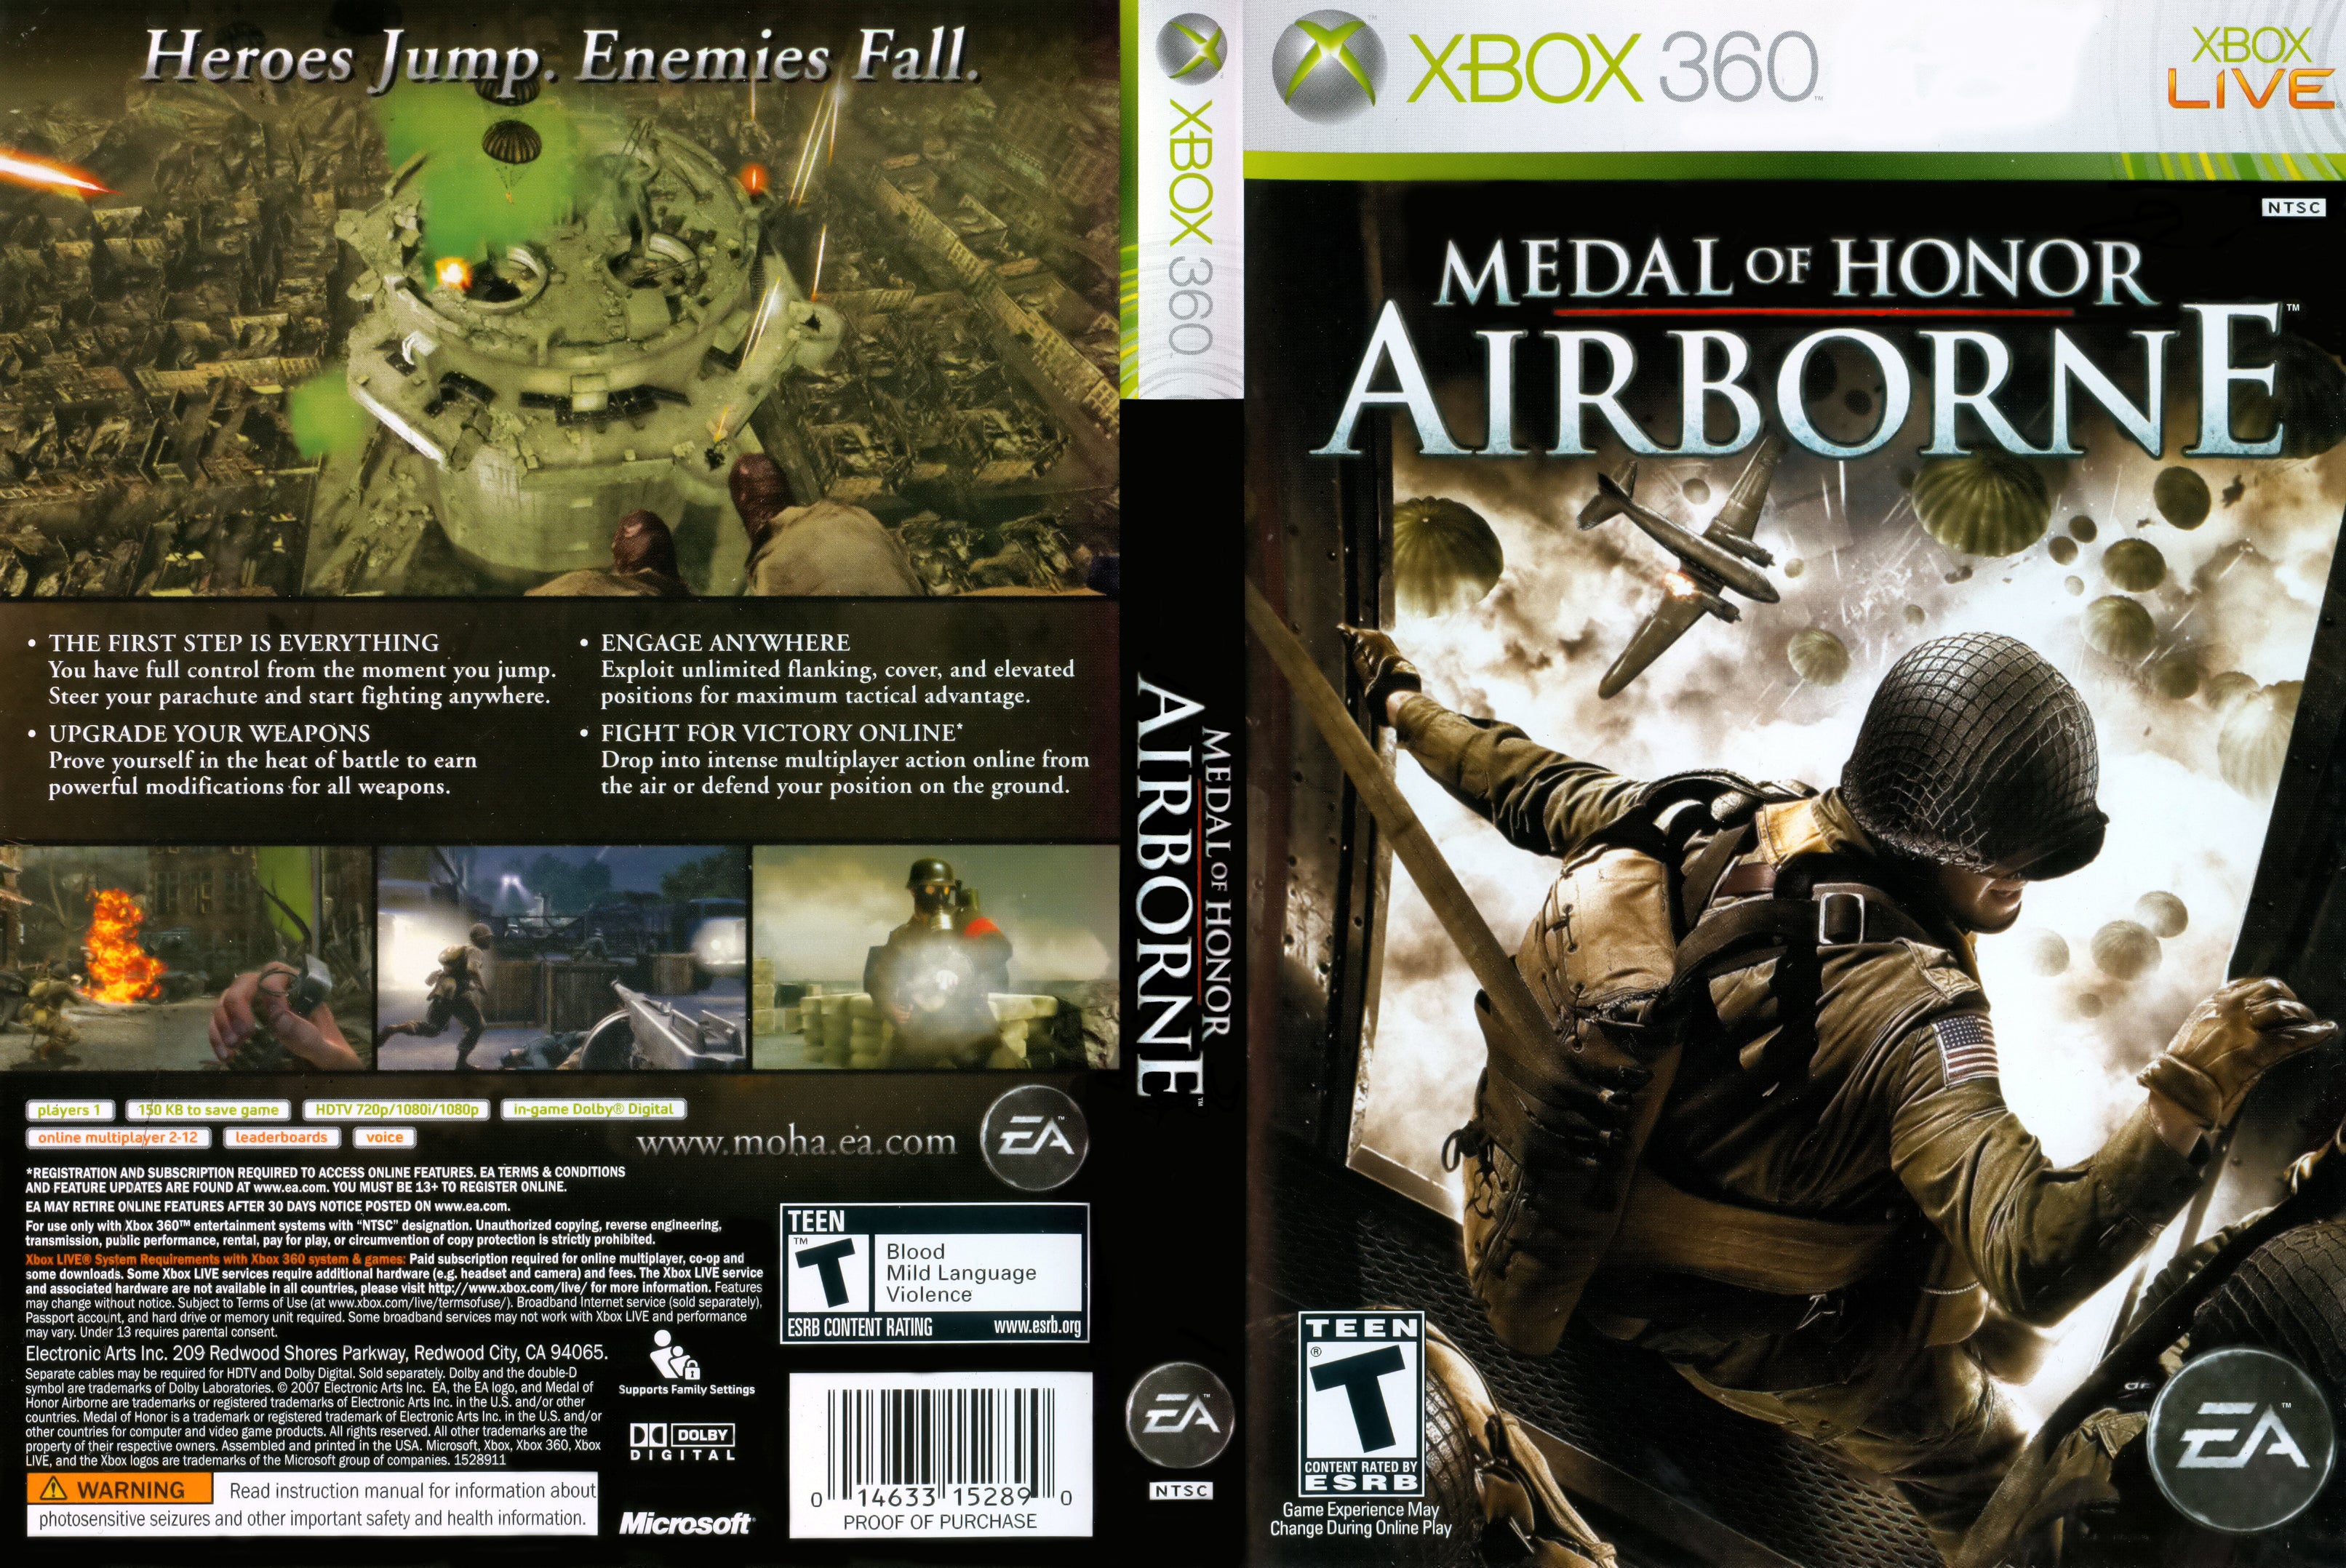 Medal of honor 360. Medal of Honor Airborne (ps3). Medal of Honor Airborne Xbox 360. Medal of Honor Airborne обложка. Игра for Honor на Xbox 360.